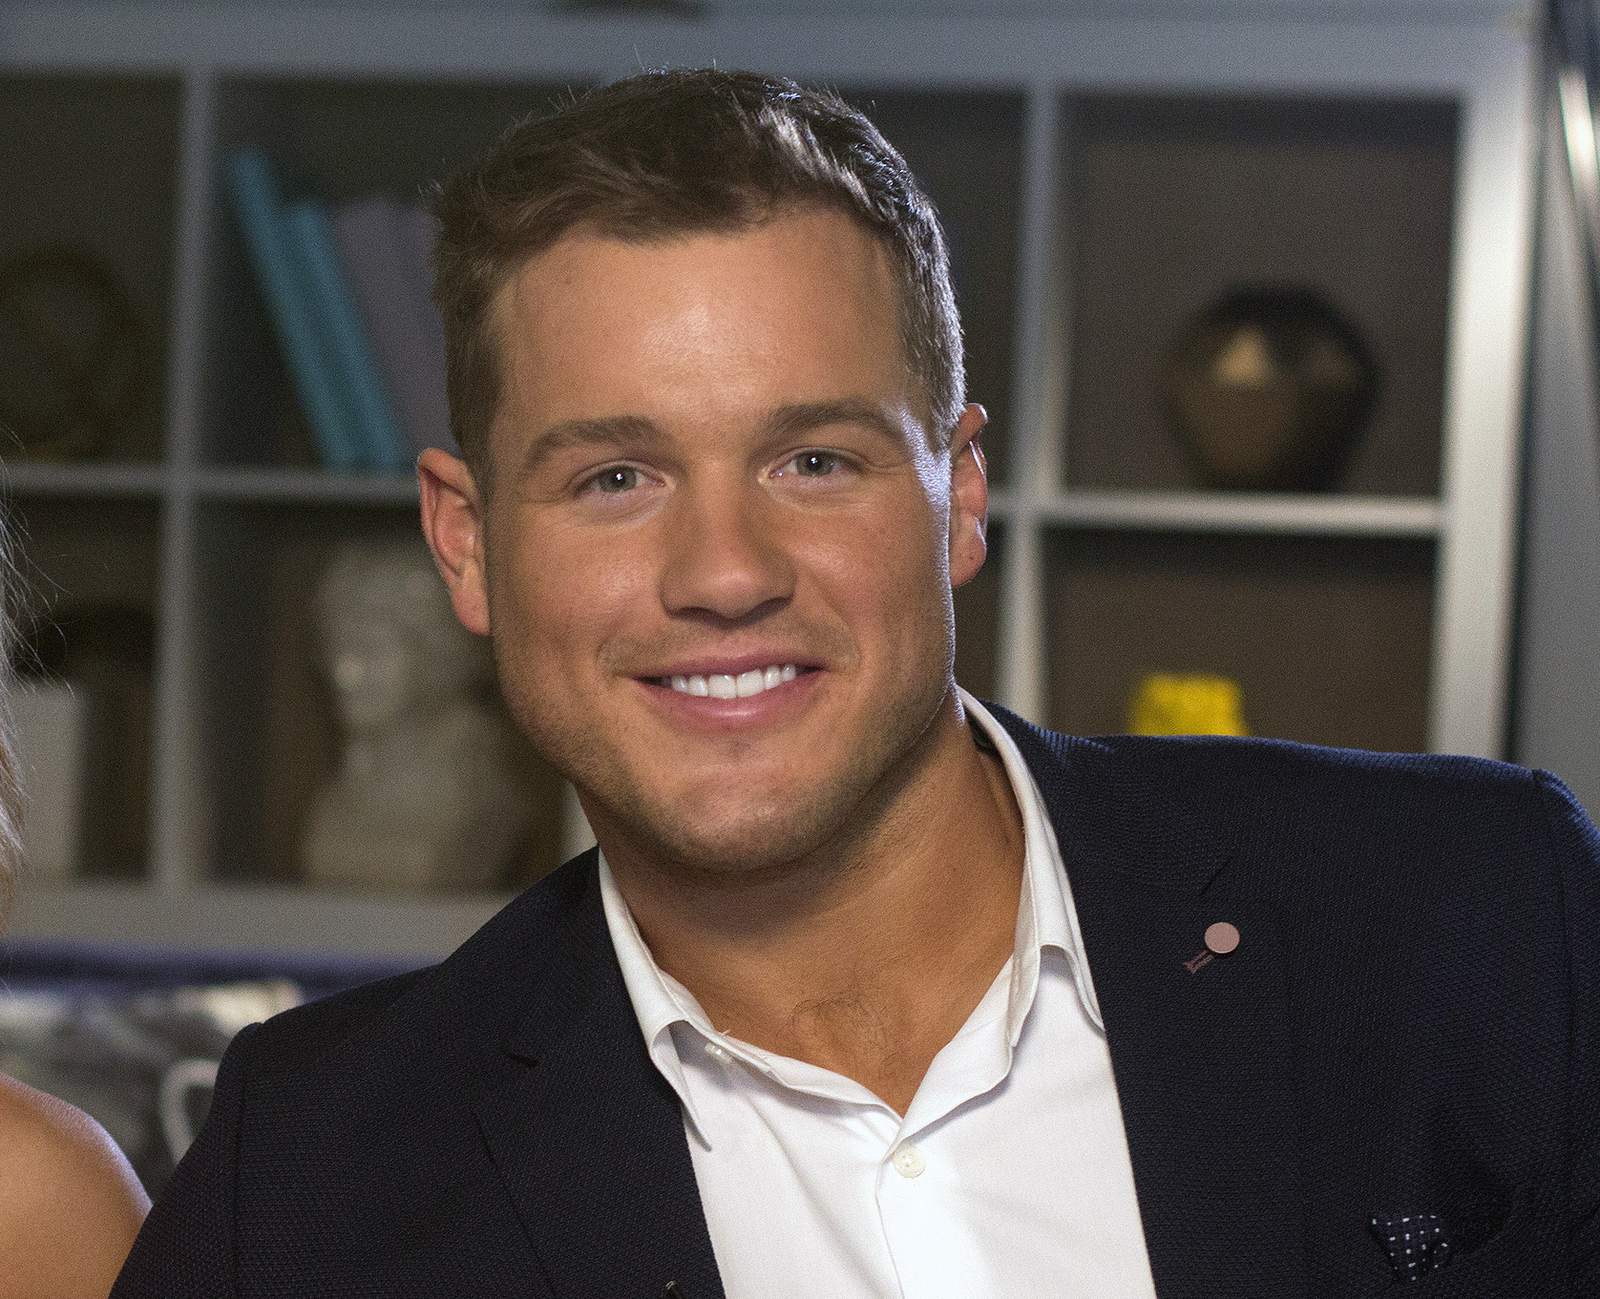 ‘The Bachelor’ star Colton Underwood comes out as gay